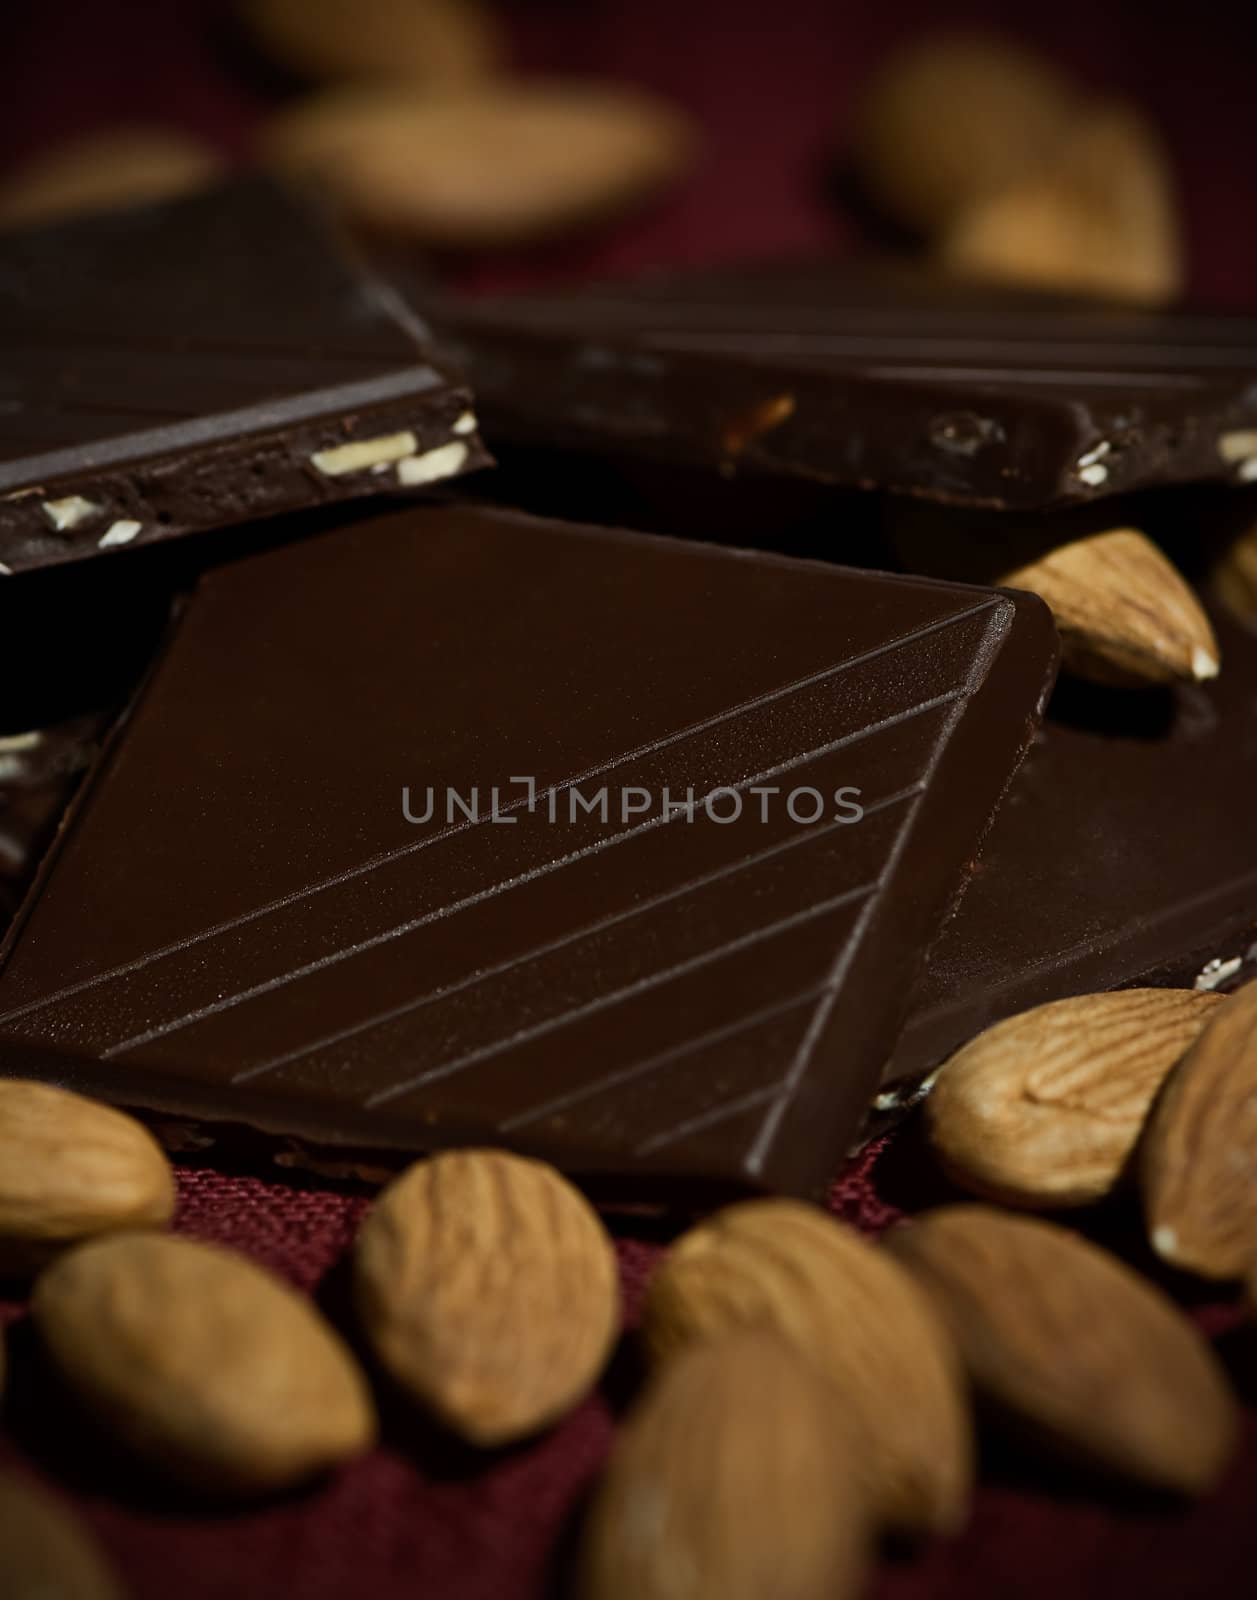 Pieces of milk chocolate with almonds.